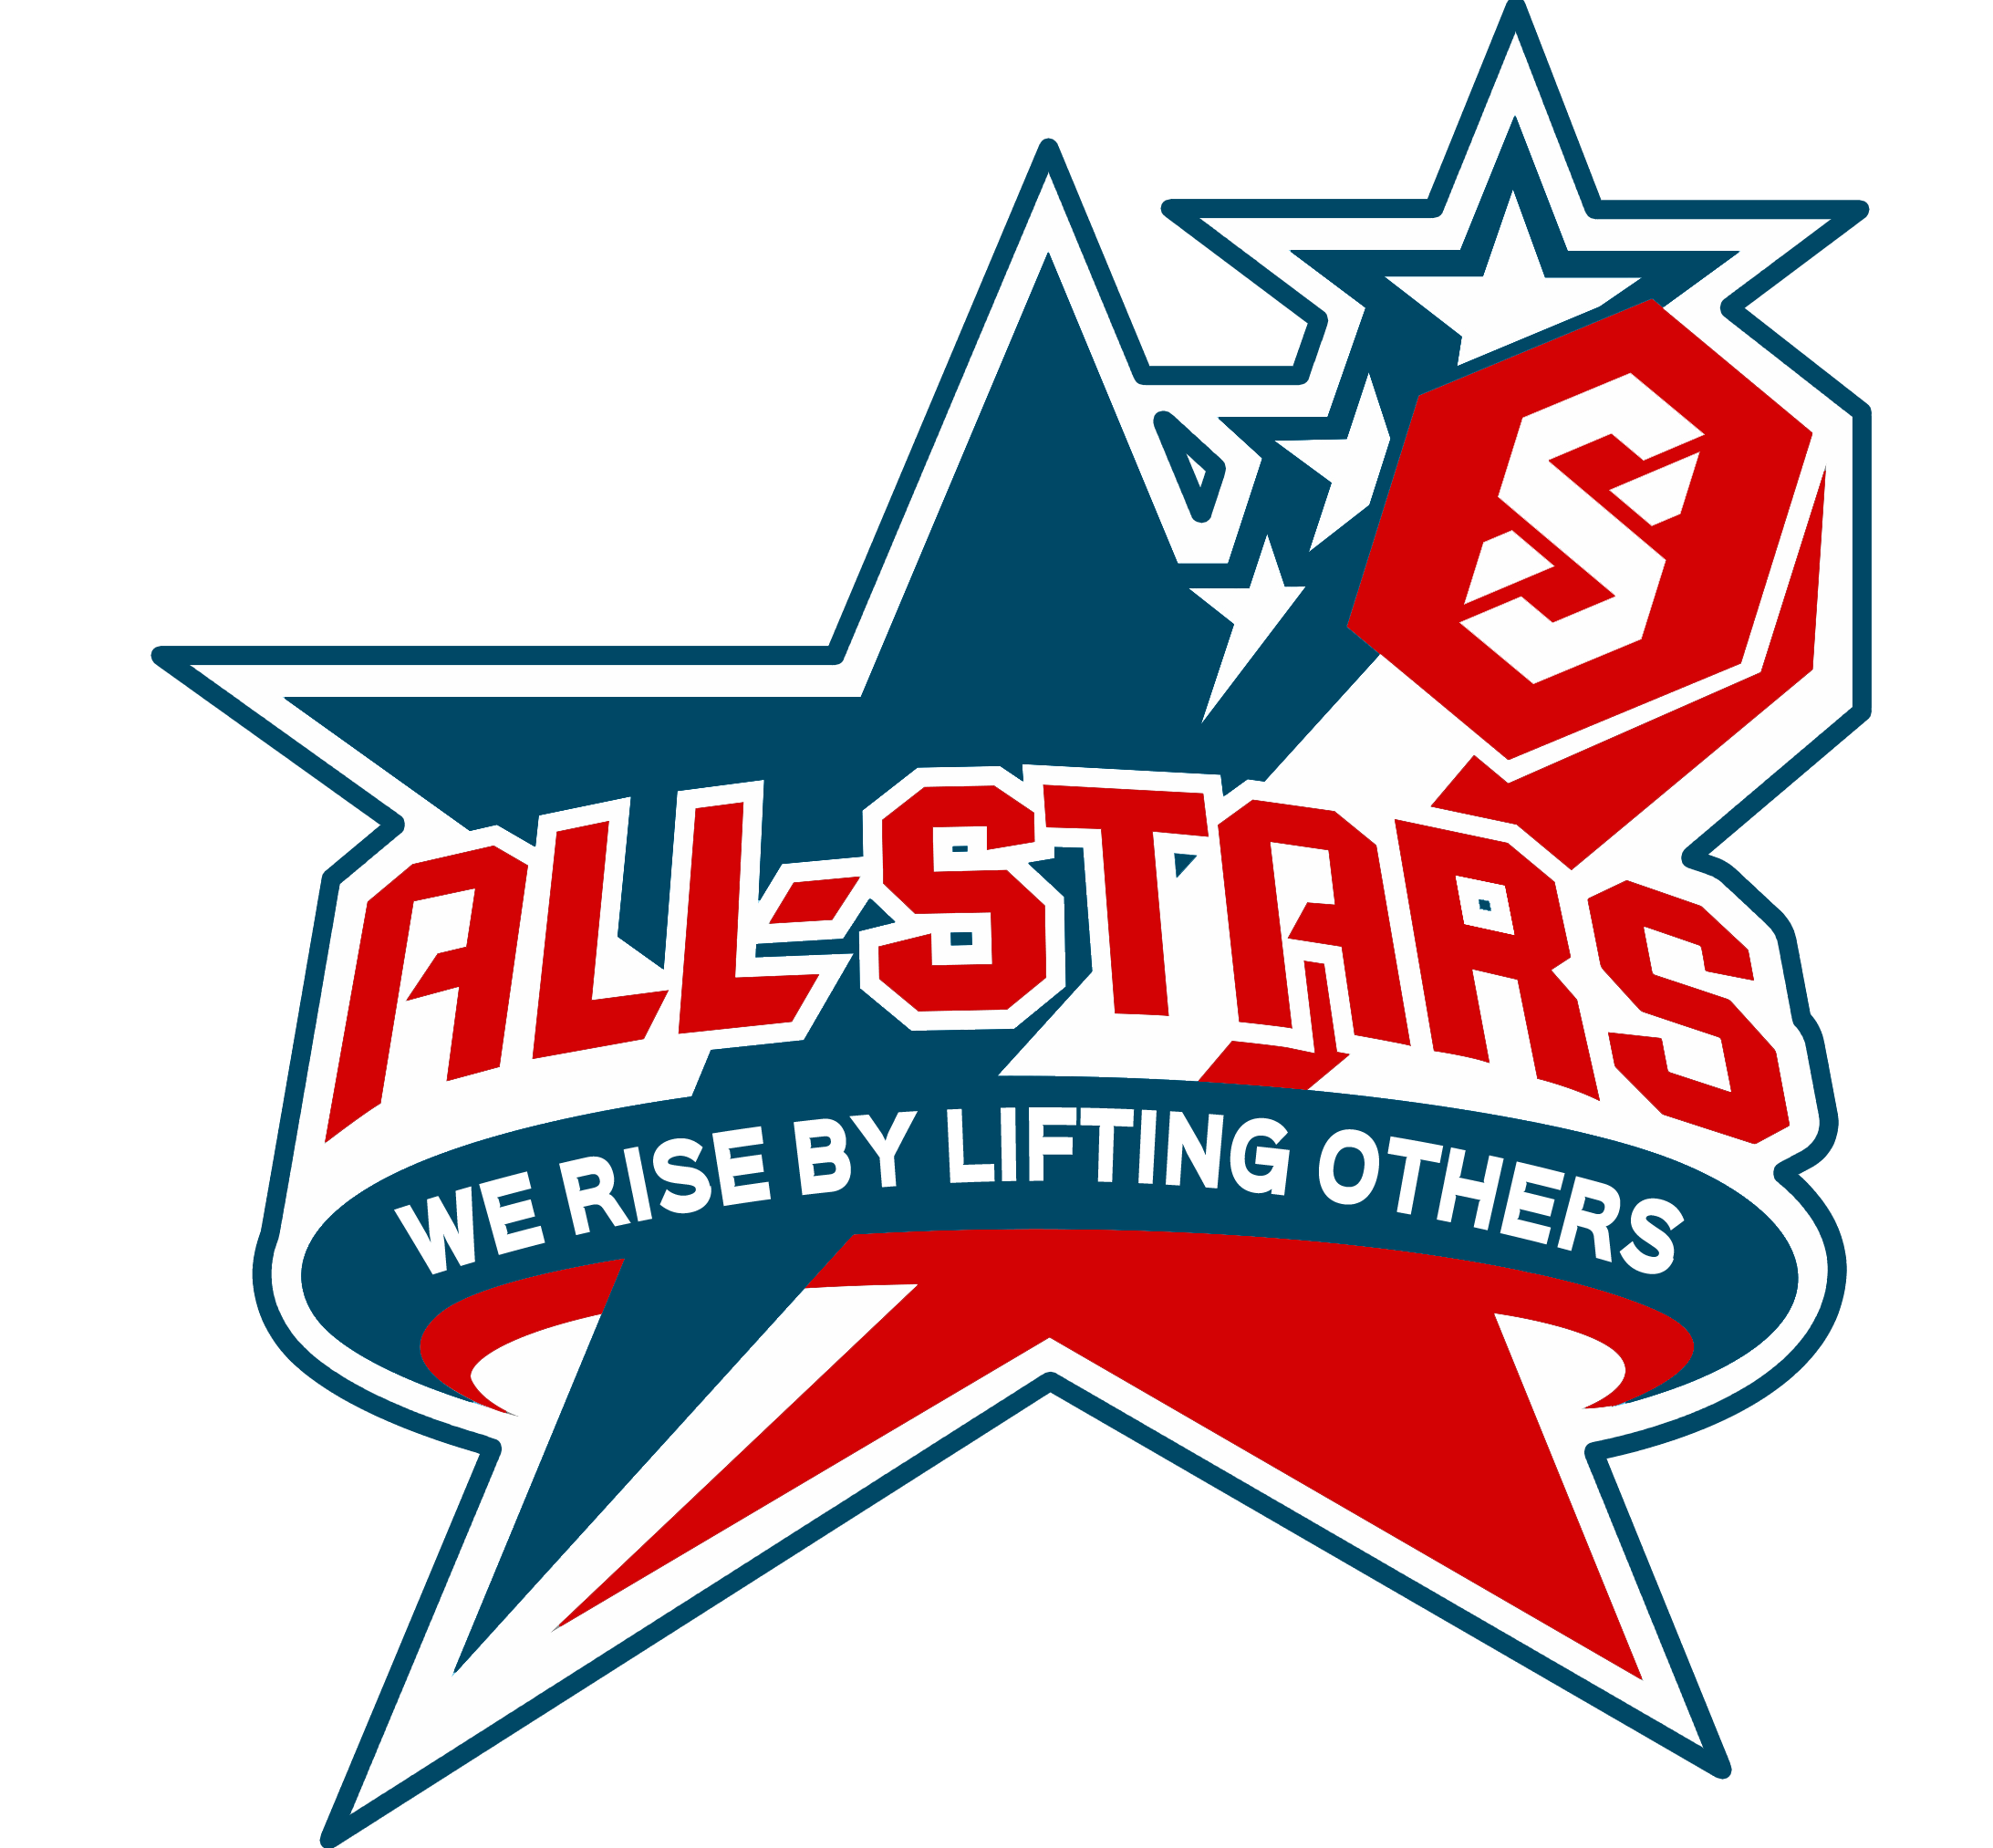 Thank you All Stars Club for your sponsorship